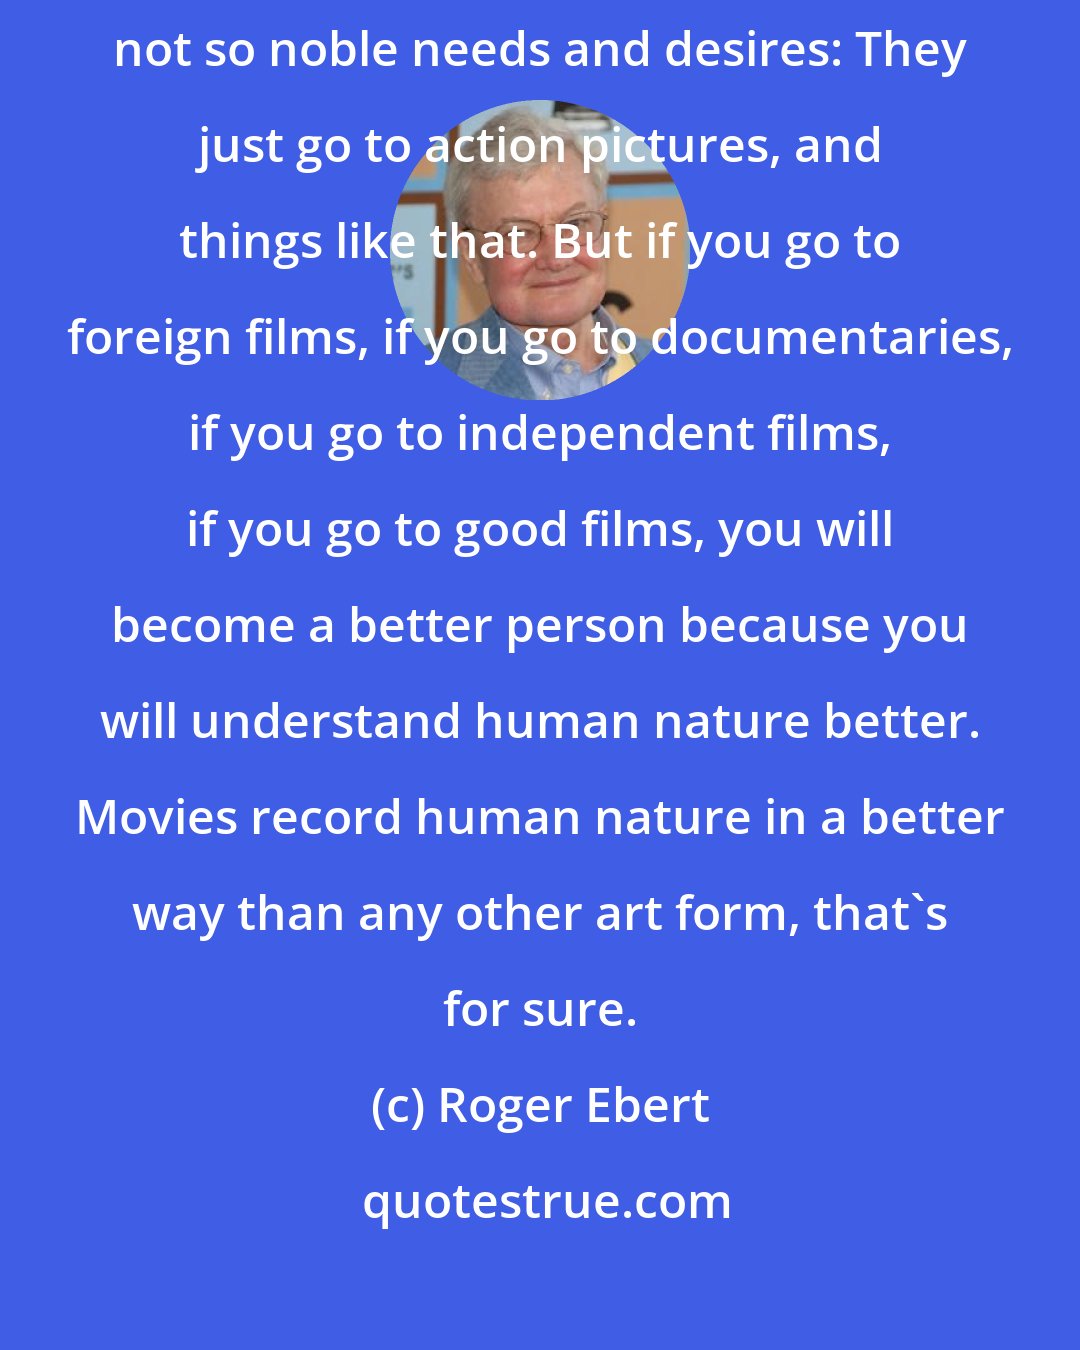 Roger Ebert: A lot of people just go to movies that feed into their preexisting and not so noble needs and desires: They just go to action pictures, and things like that. But if you go to foreign films, if you go to documentaries, if you go to independent films, if you go to good films, you will become a better person because you will understand human nature better. Movies record human nature in a better way than any other art form, that's for sure.